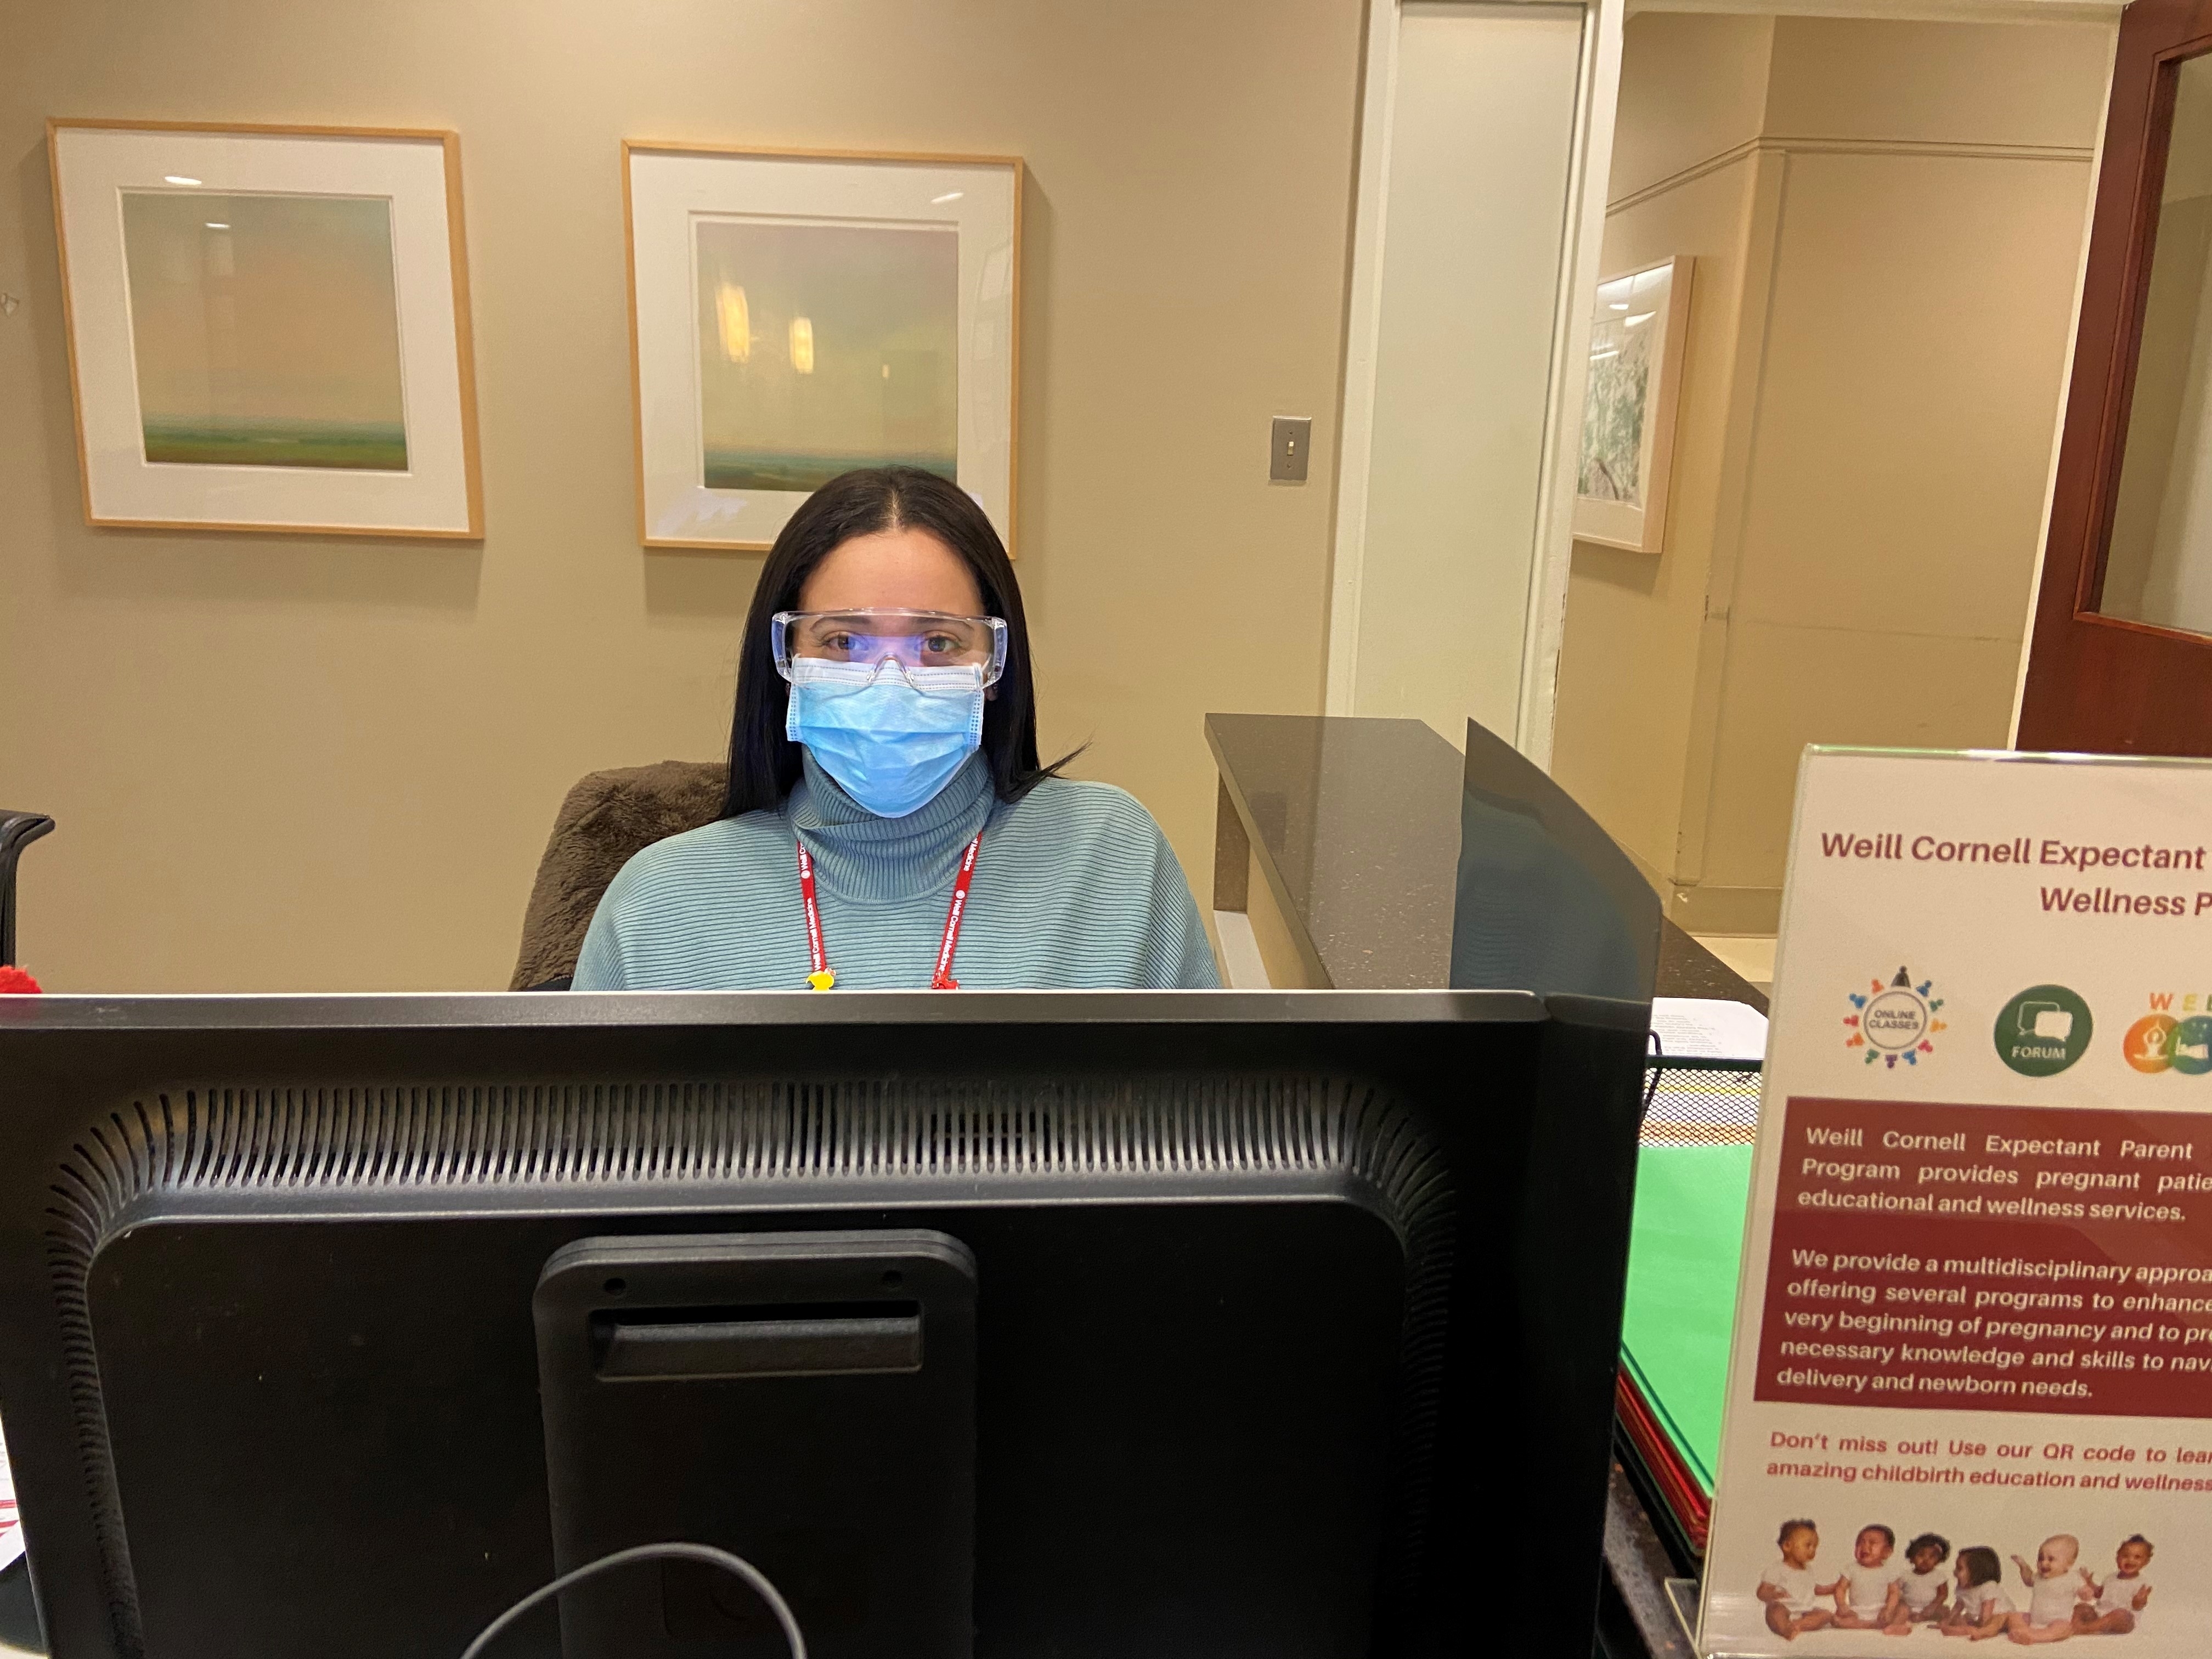 Receptionist in mask